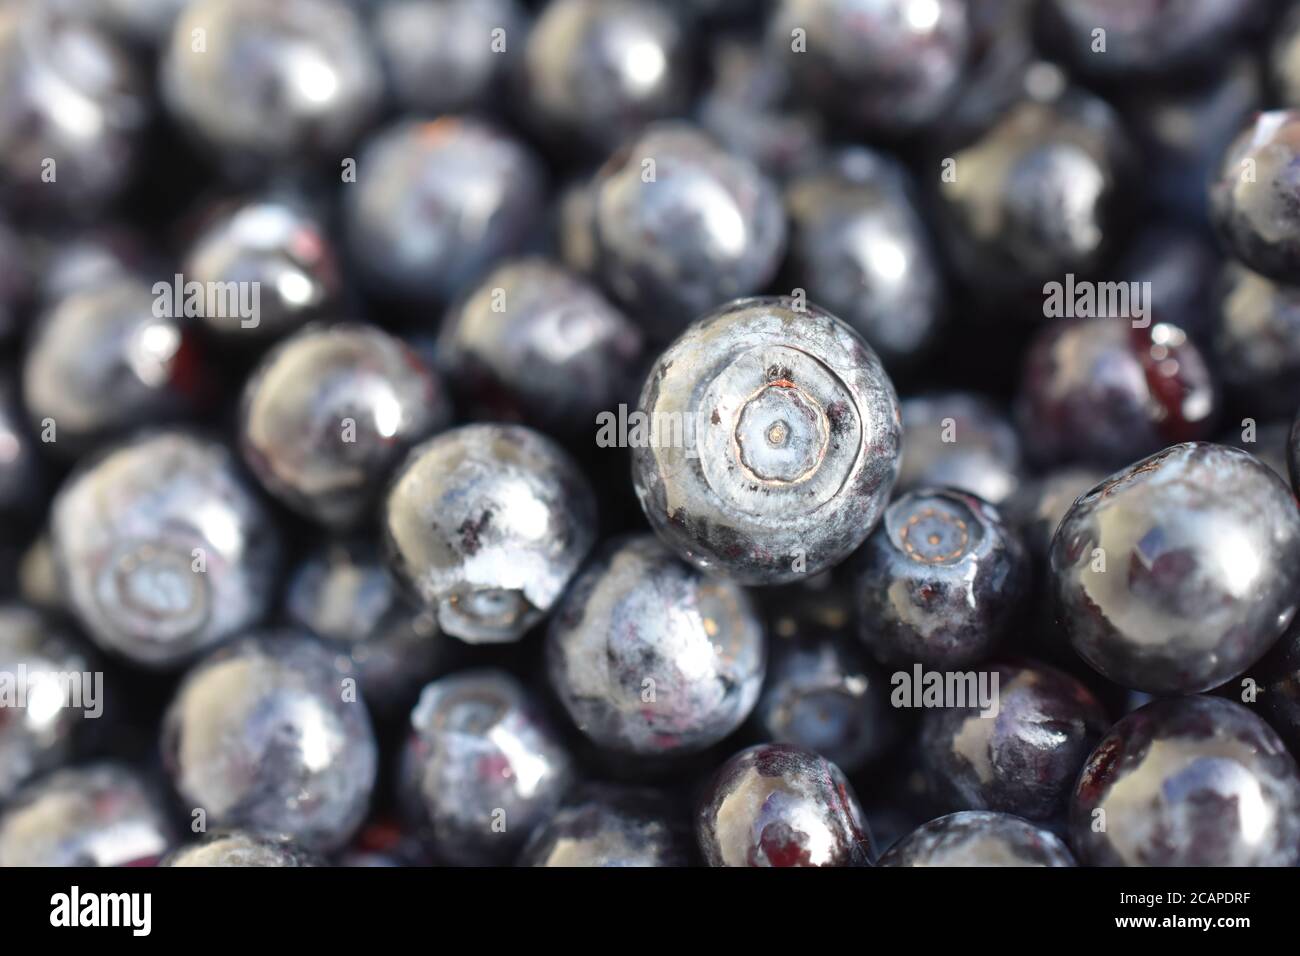 Extreme closeup on group of ripe blueberries Stock Photo